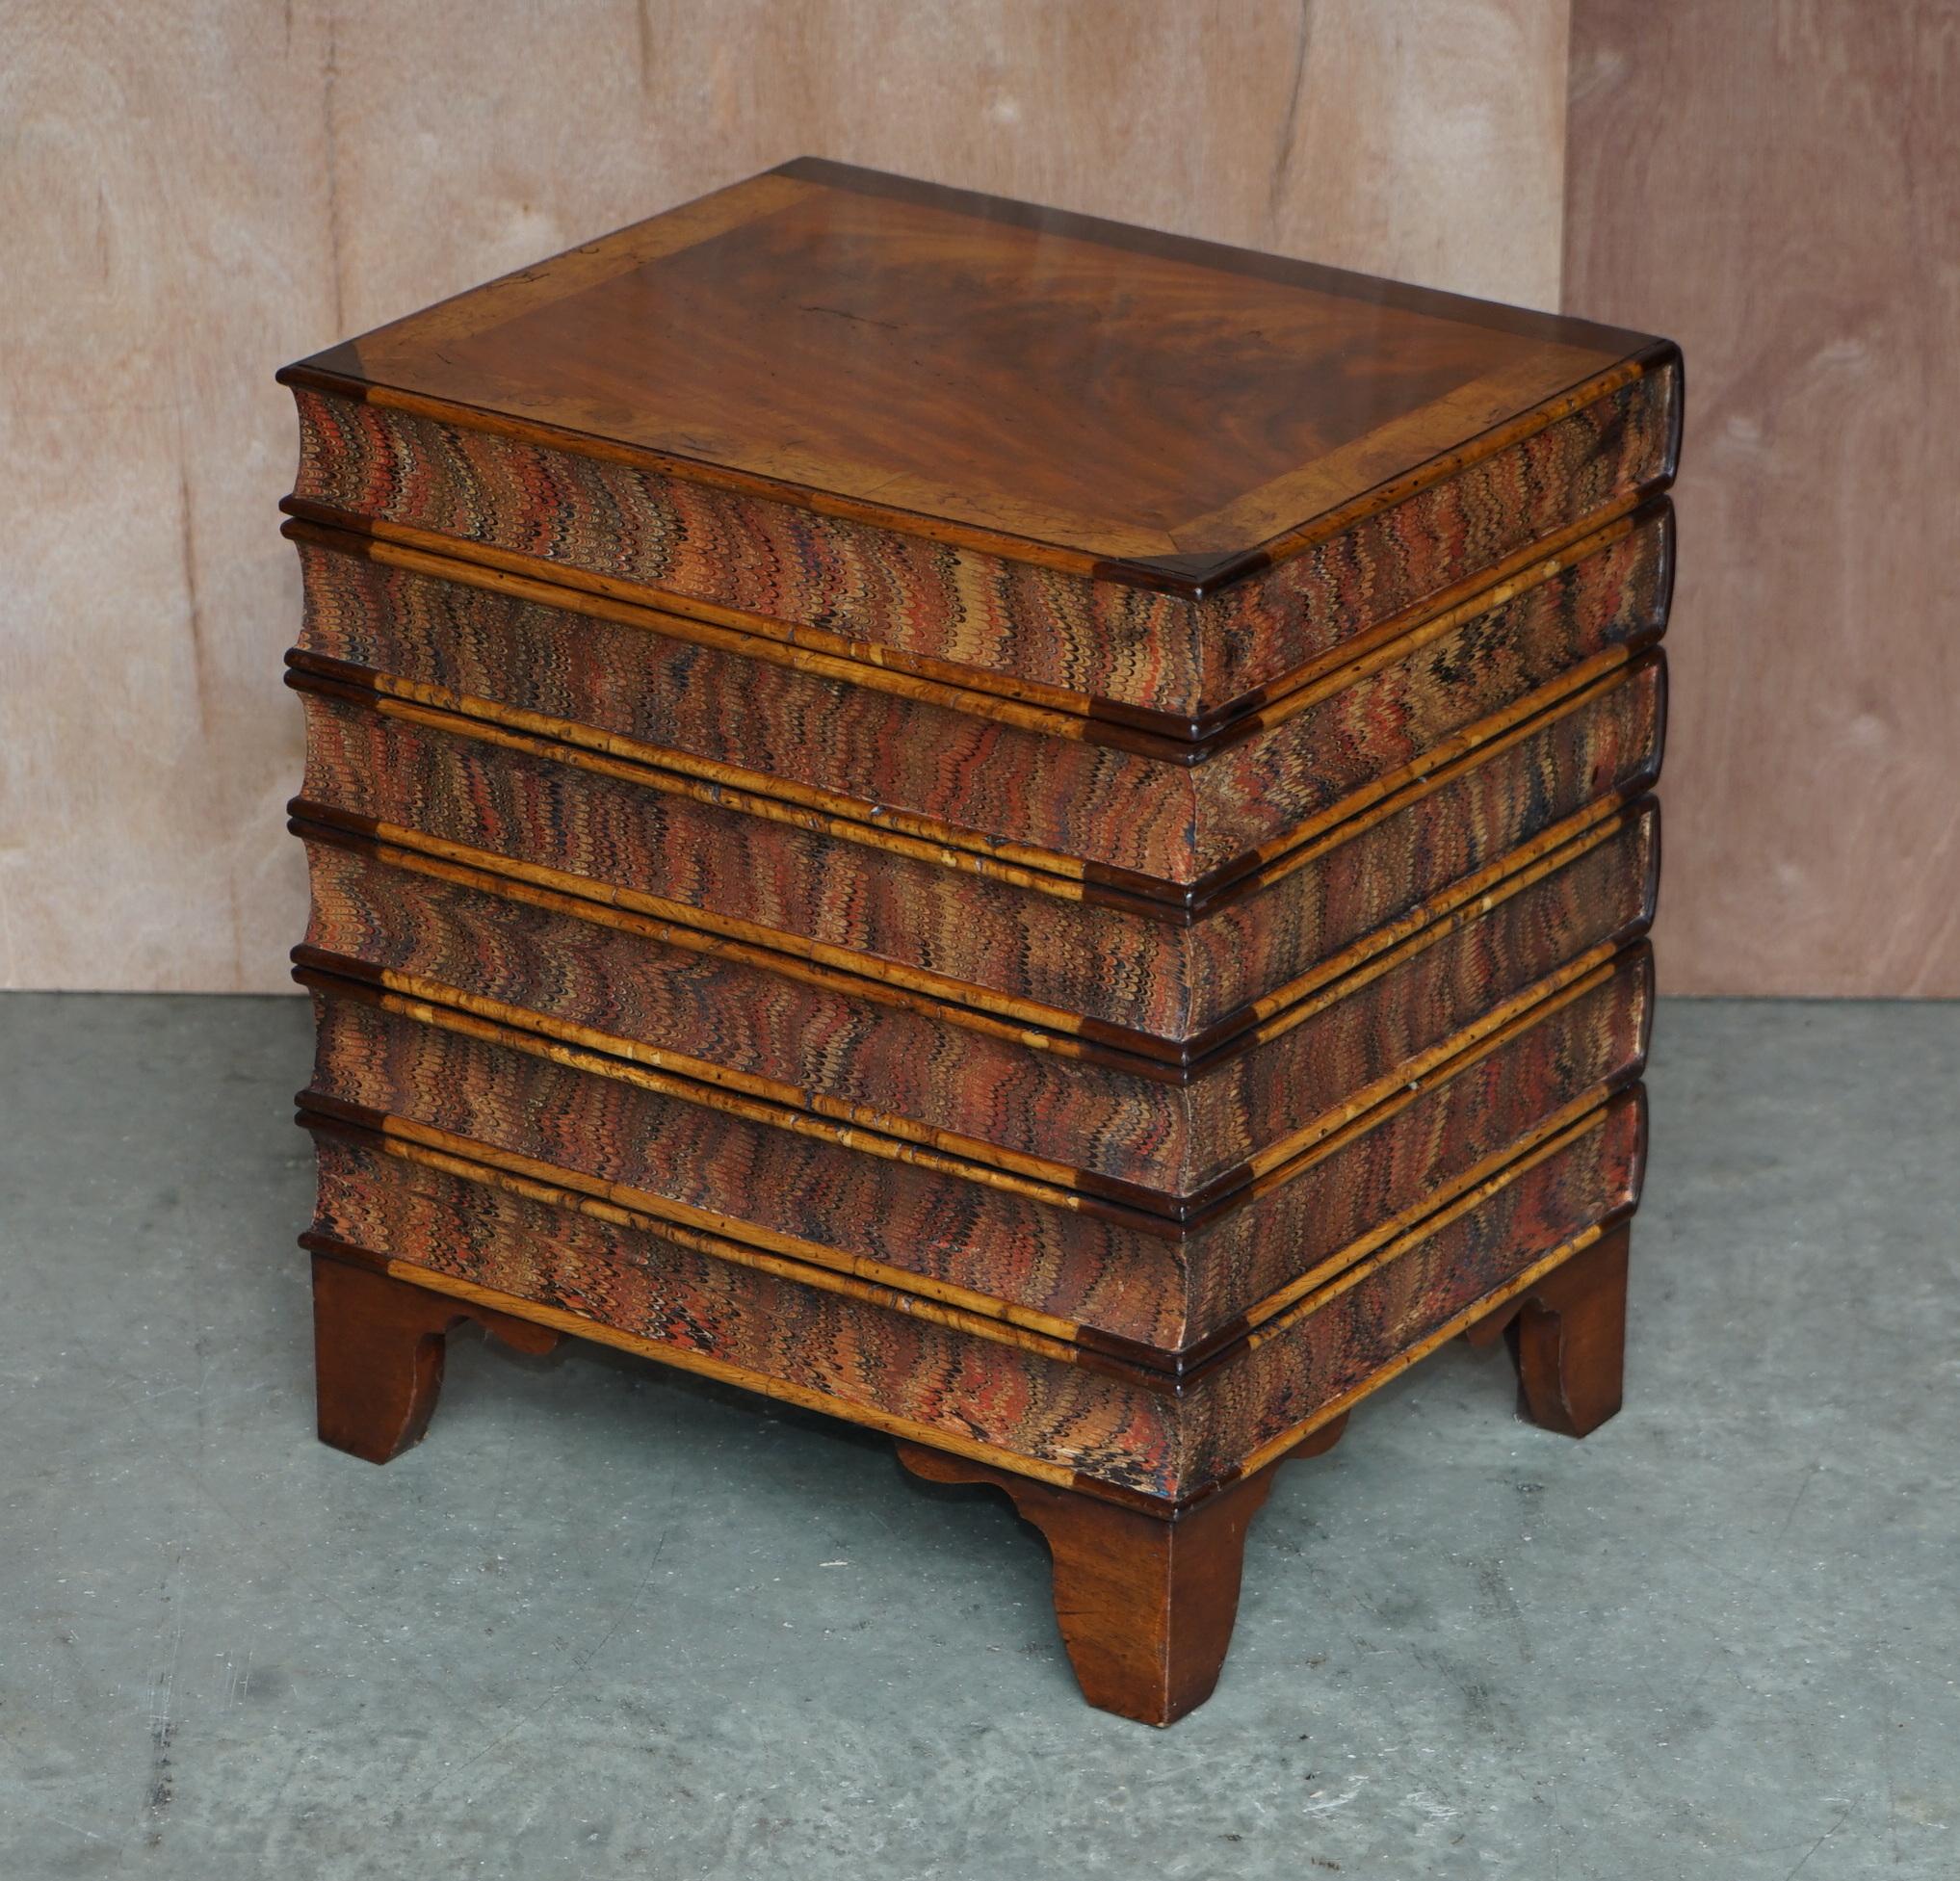 We are delighted to offer for sale this very rare pair of vintage fully restored flamed mahogany stacking books side tables with internal storage. 

A very rare pair, I have never seen this model before, they have Victorian style zigzag veneer on